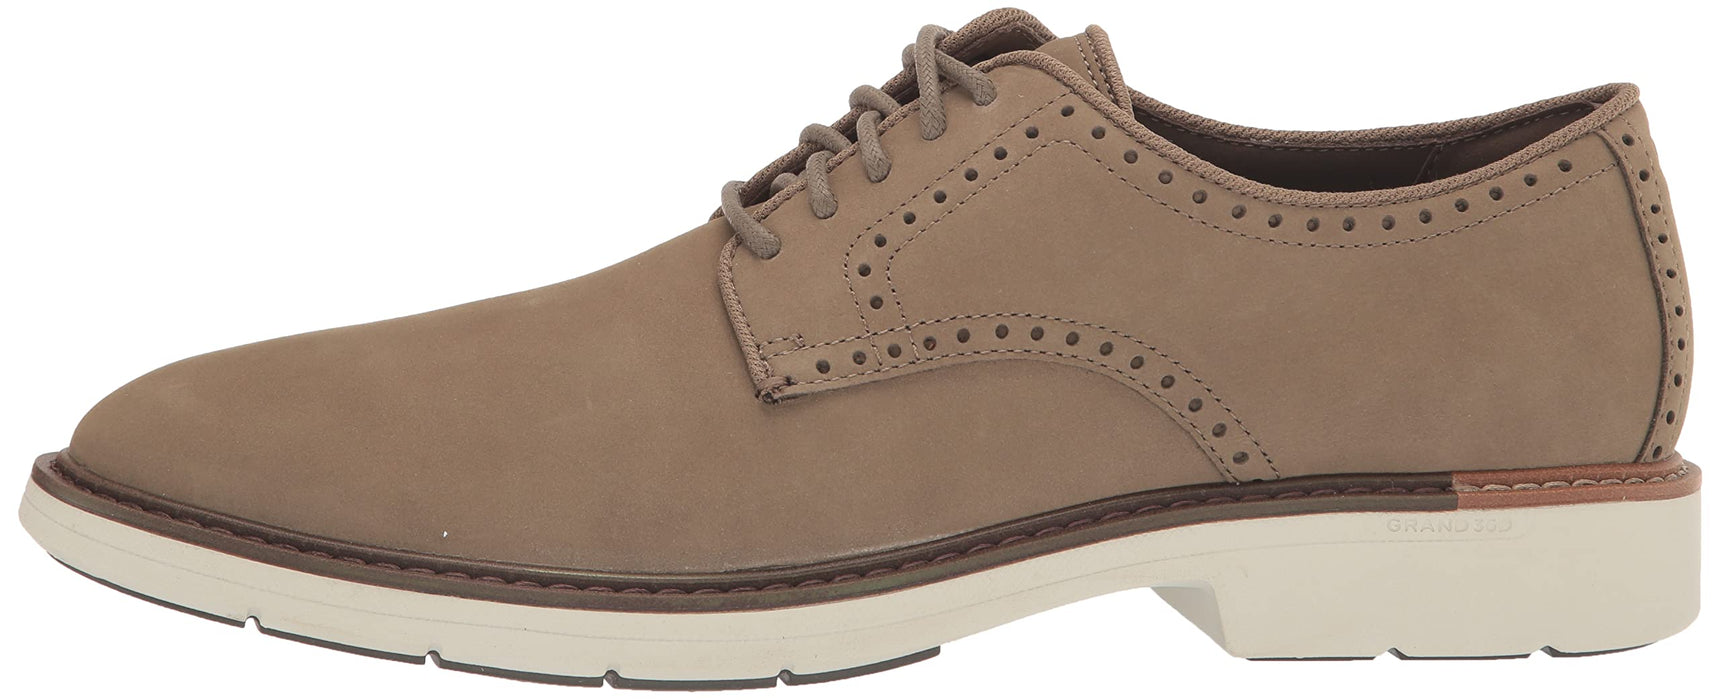 Cole Haan Mens Go-To Plain Toe Oxford